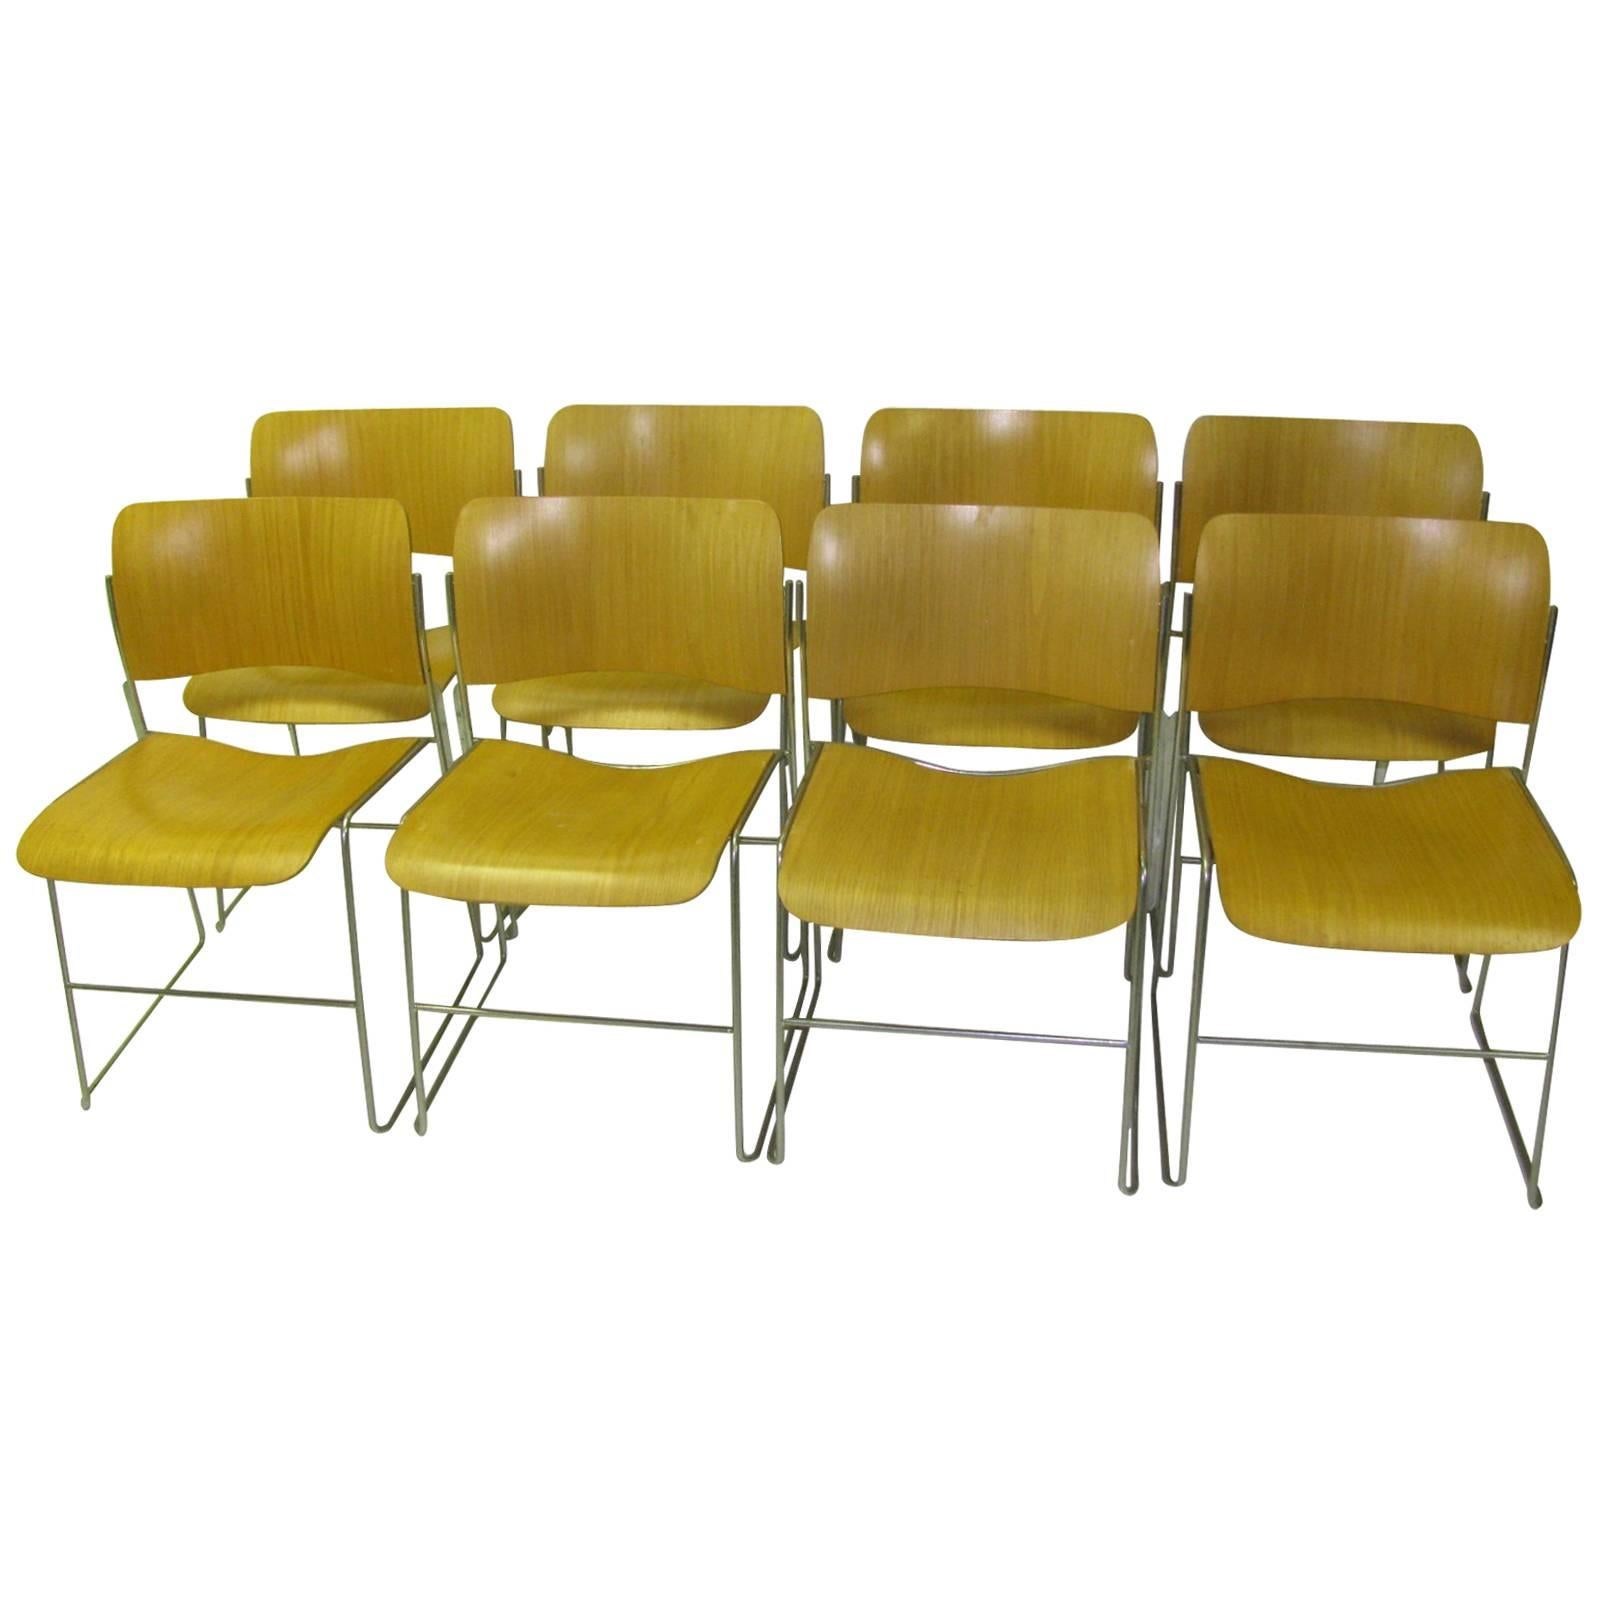 Set of Eight Mid-Century Modern 40/4 Blonde Ash Dining Chairs by David Rowland